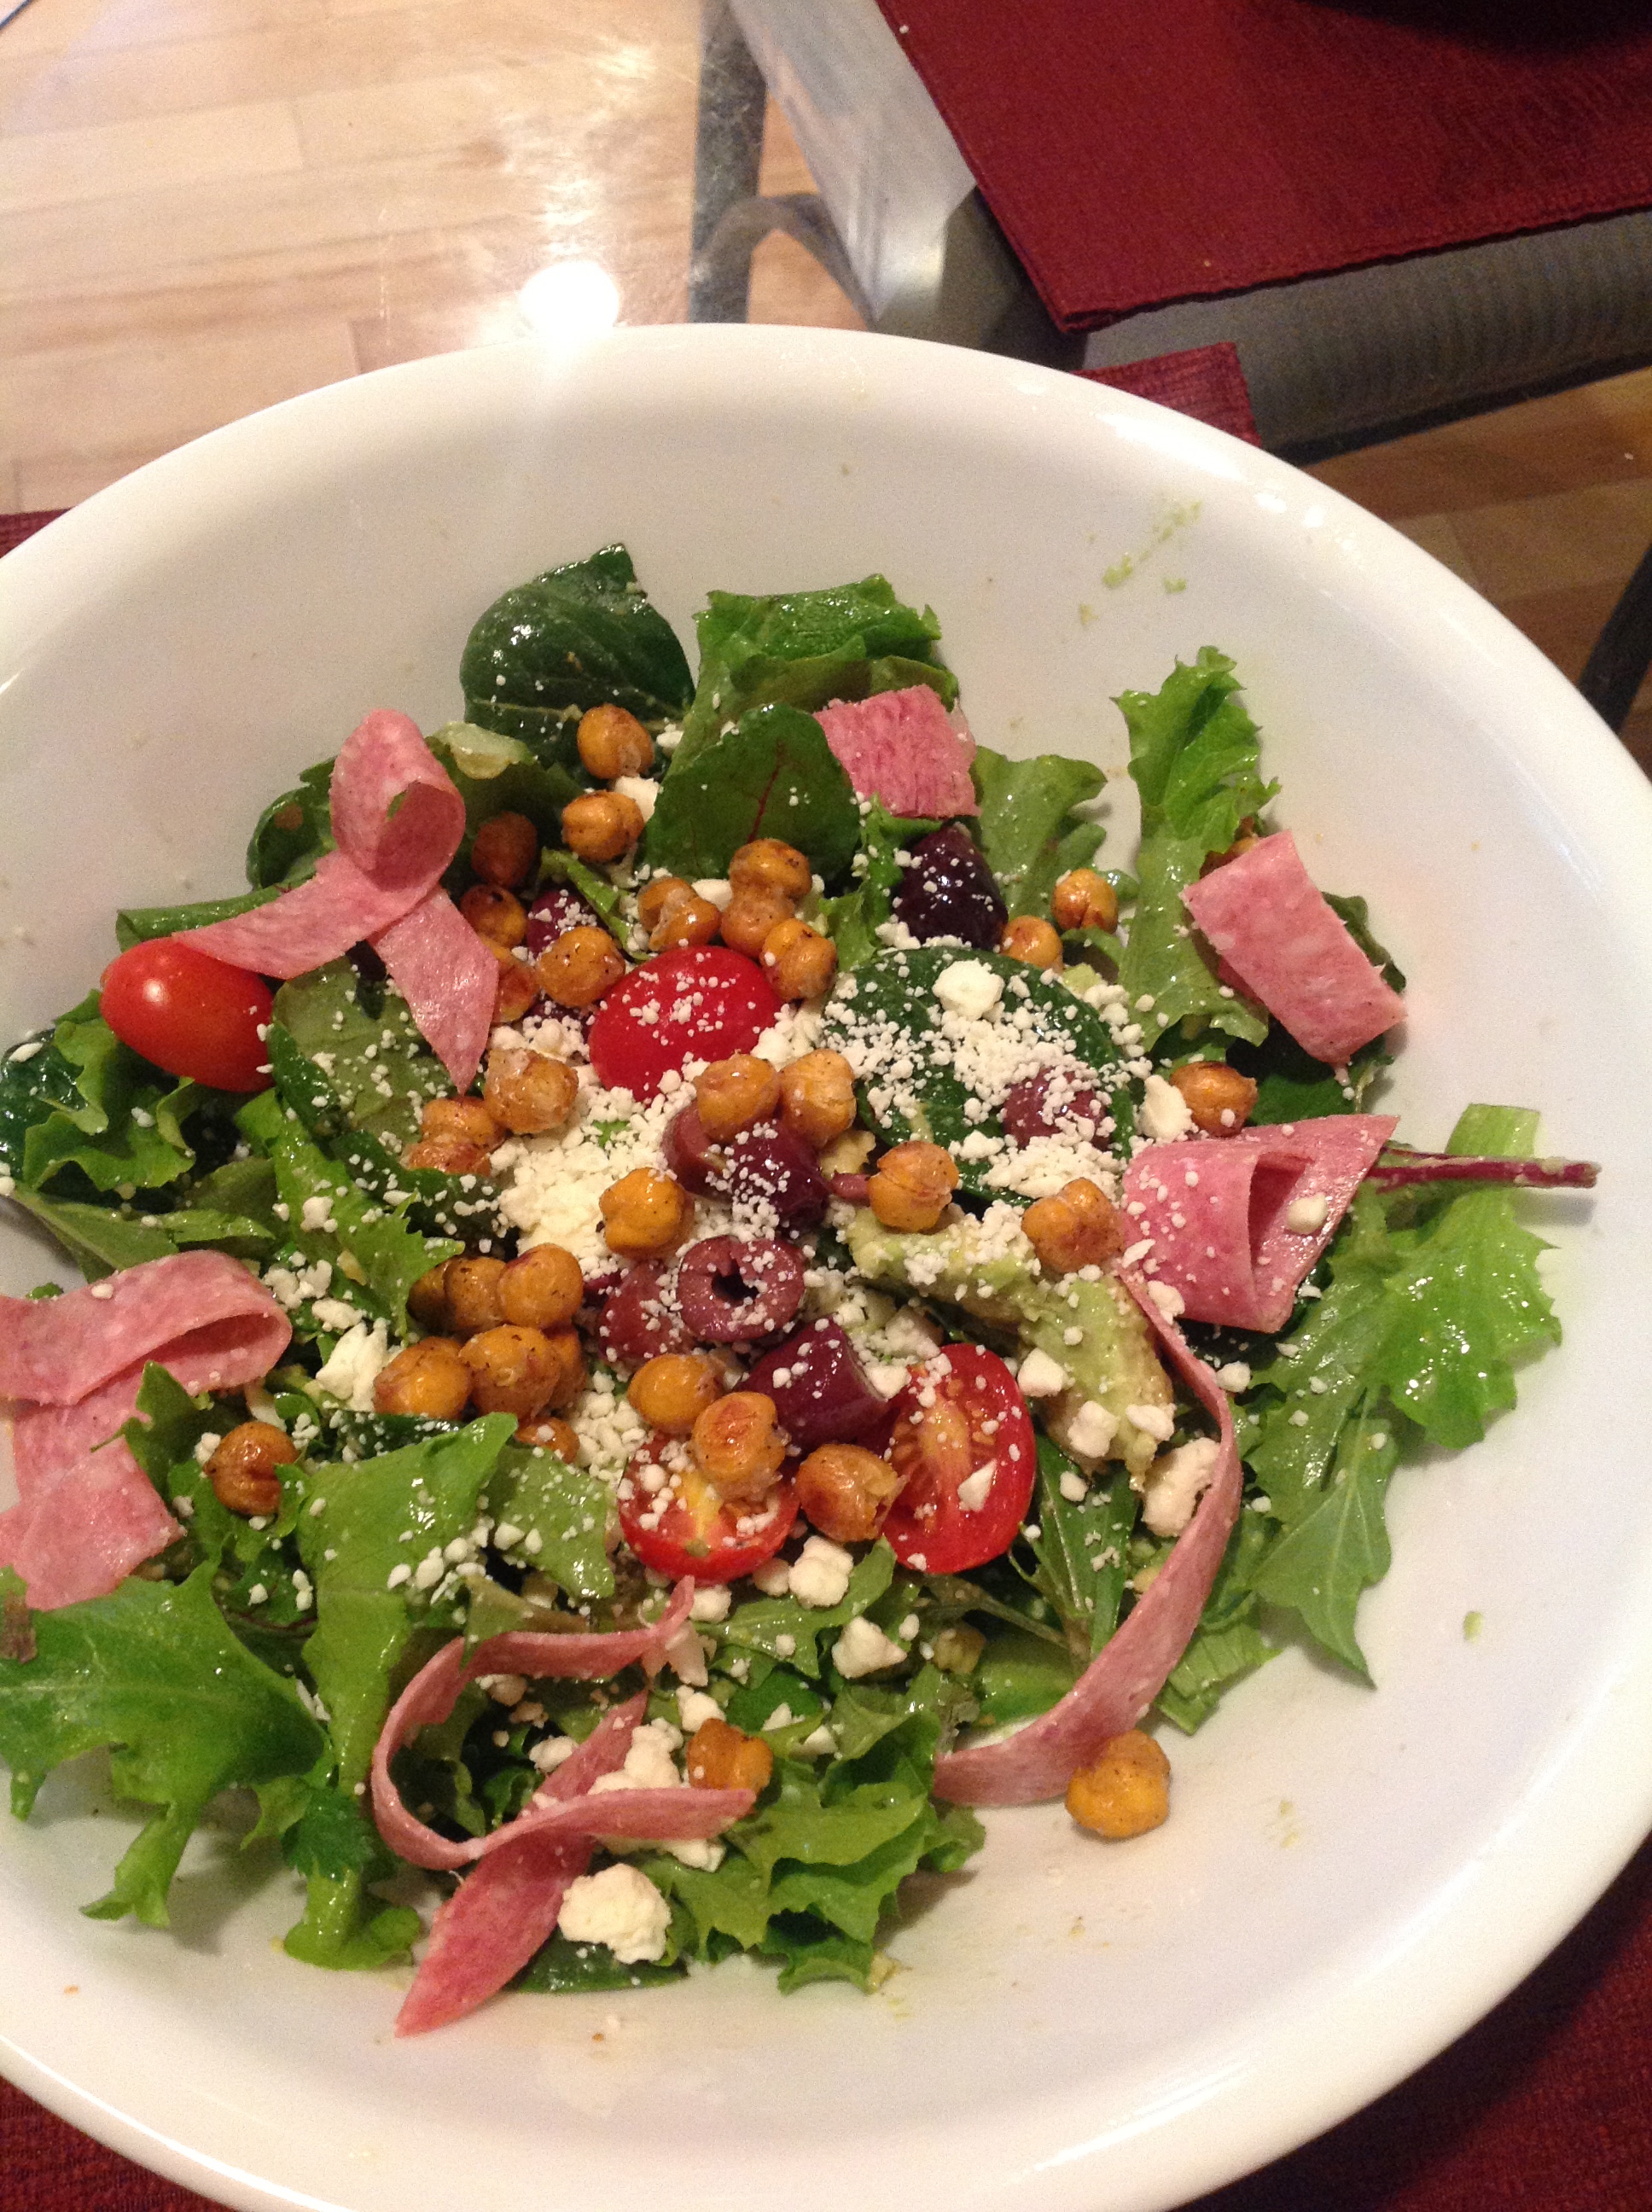 yummy salad with roasted chickpeas